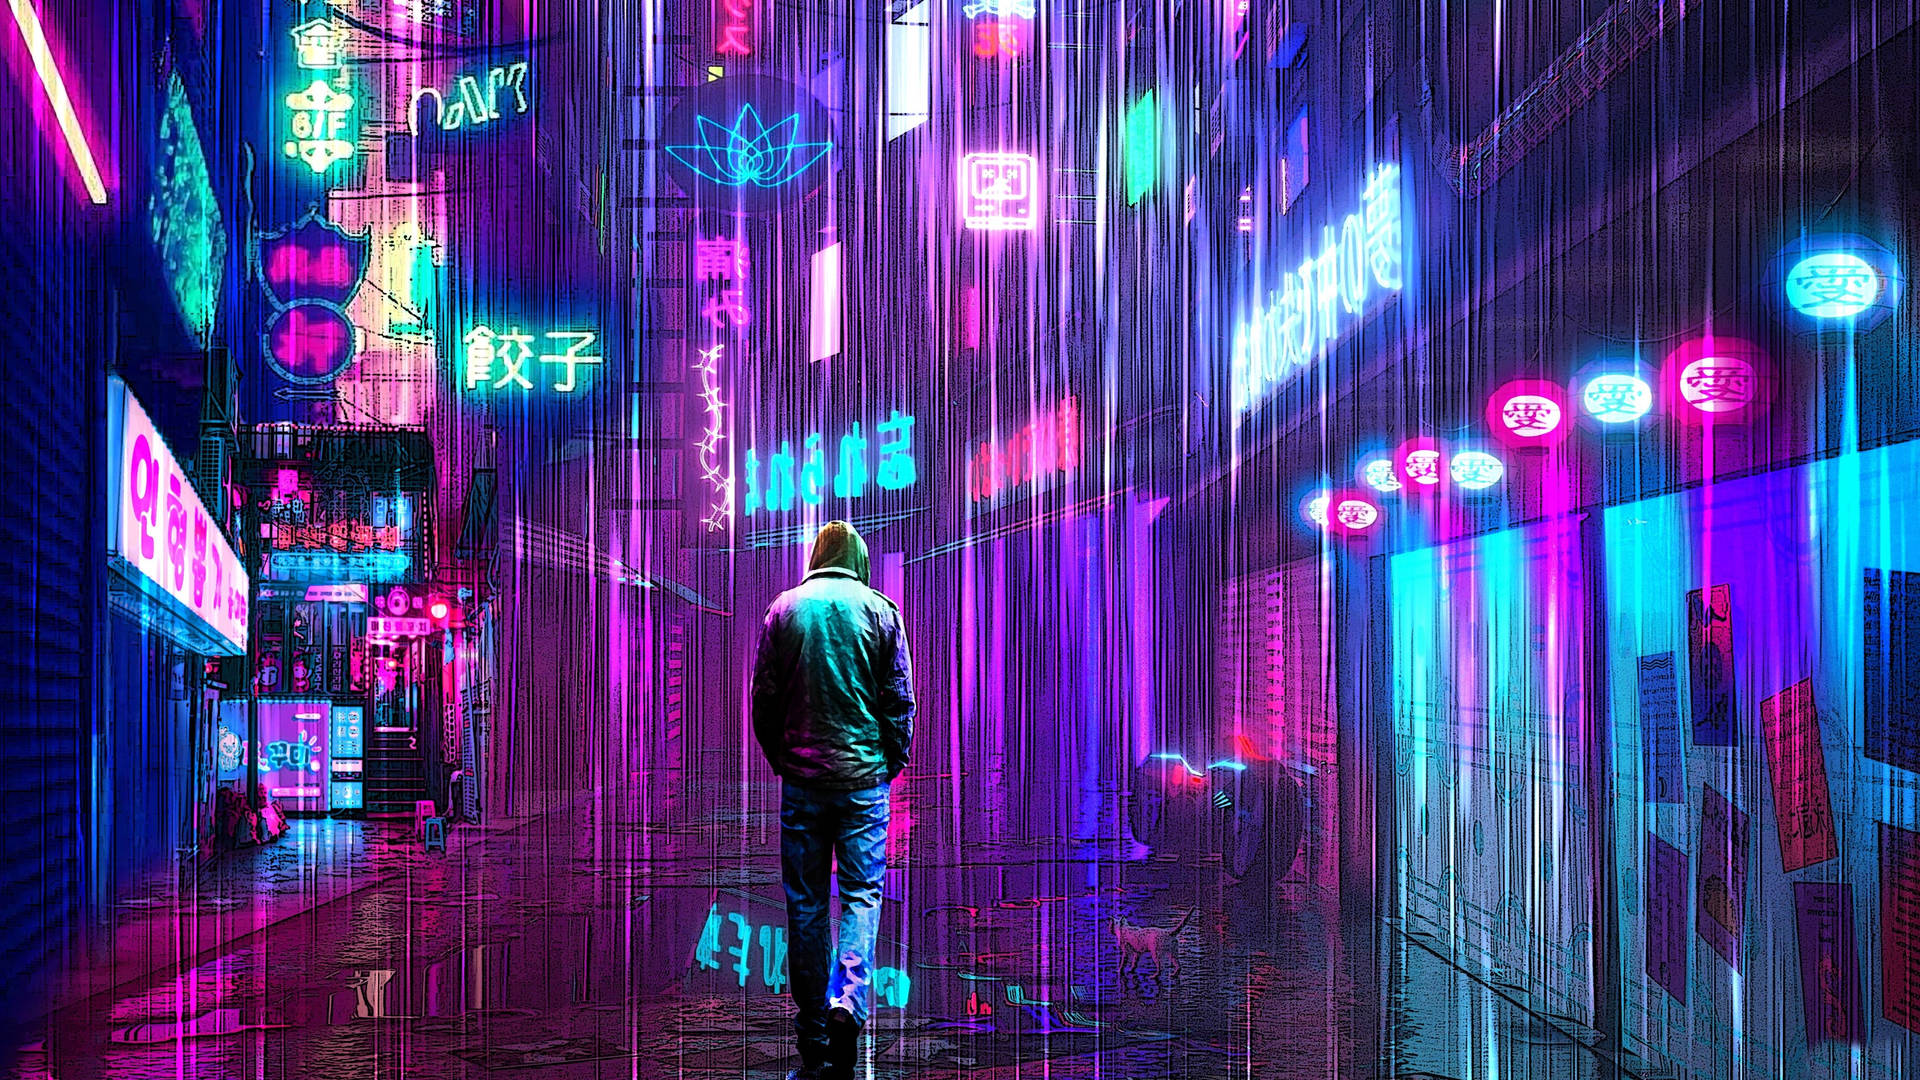 Dive into the world of technicolor with this eye-catching neon purple 4k wallpaper. Wallpaper